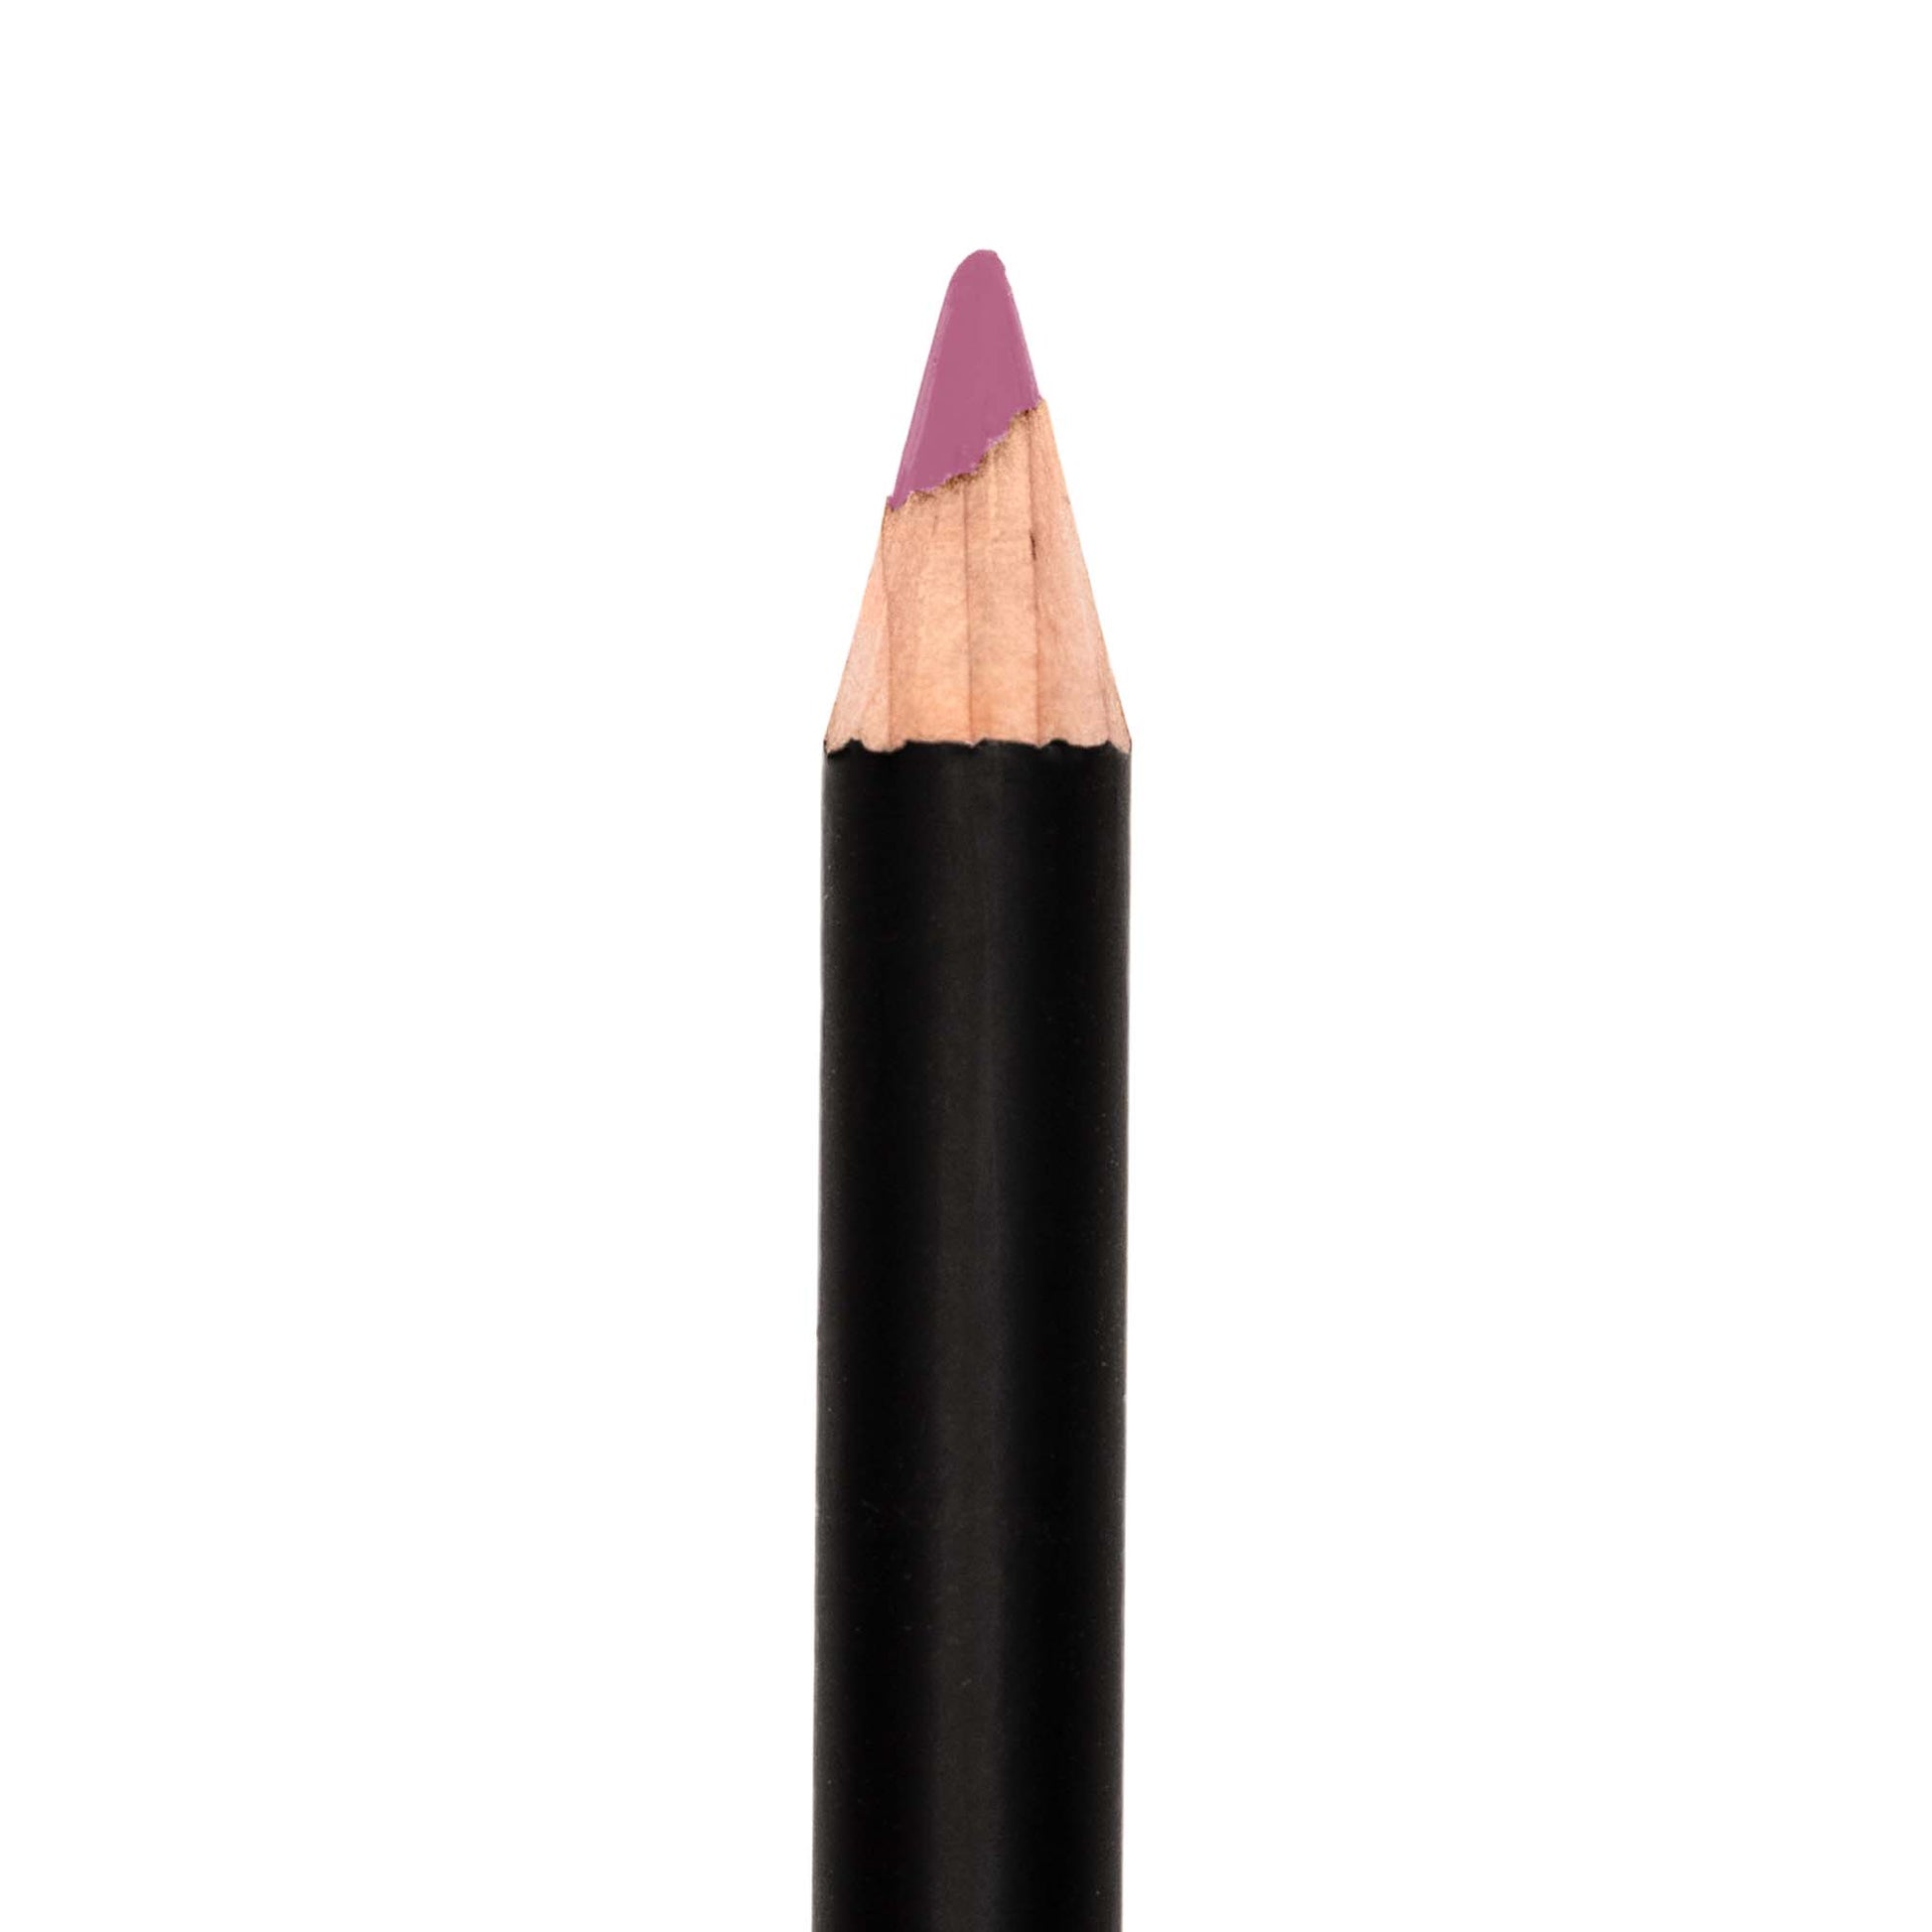 Cruisin Organics shea butter-infused lip pencil. Provides long-lasting and smudge-free results, making it ideal for use as a lipstick base. Achieve a fuller, defined smile with bold pigments and a creamy texture.